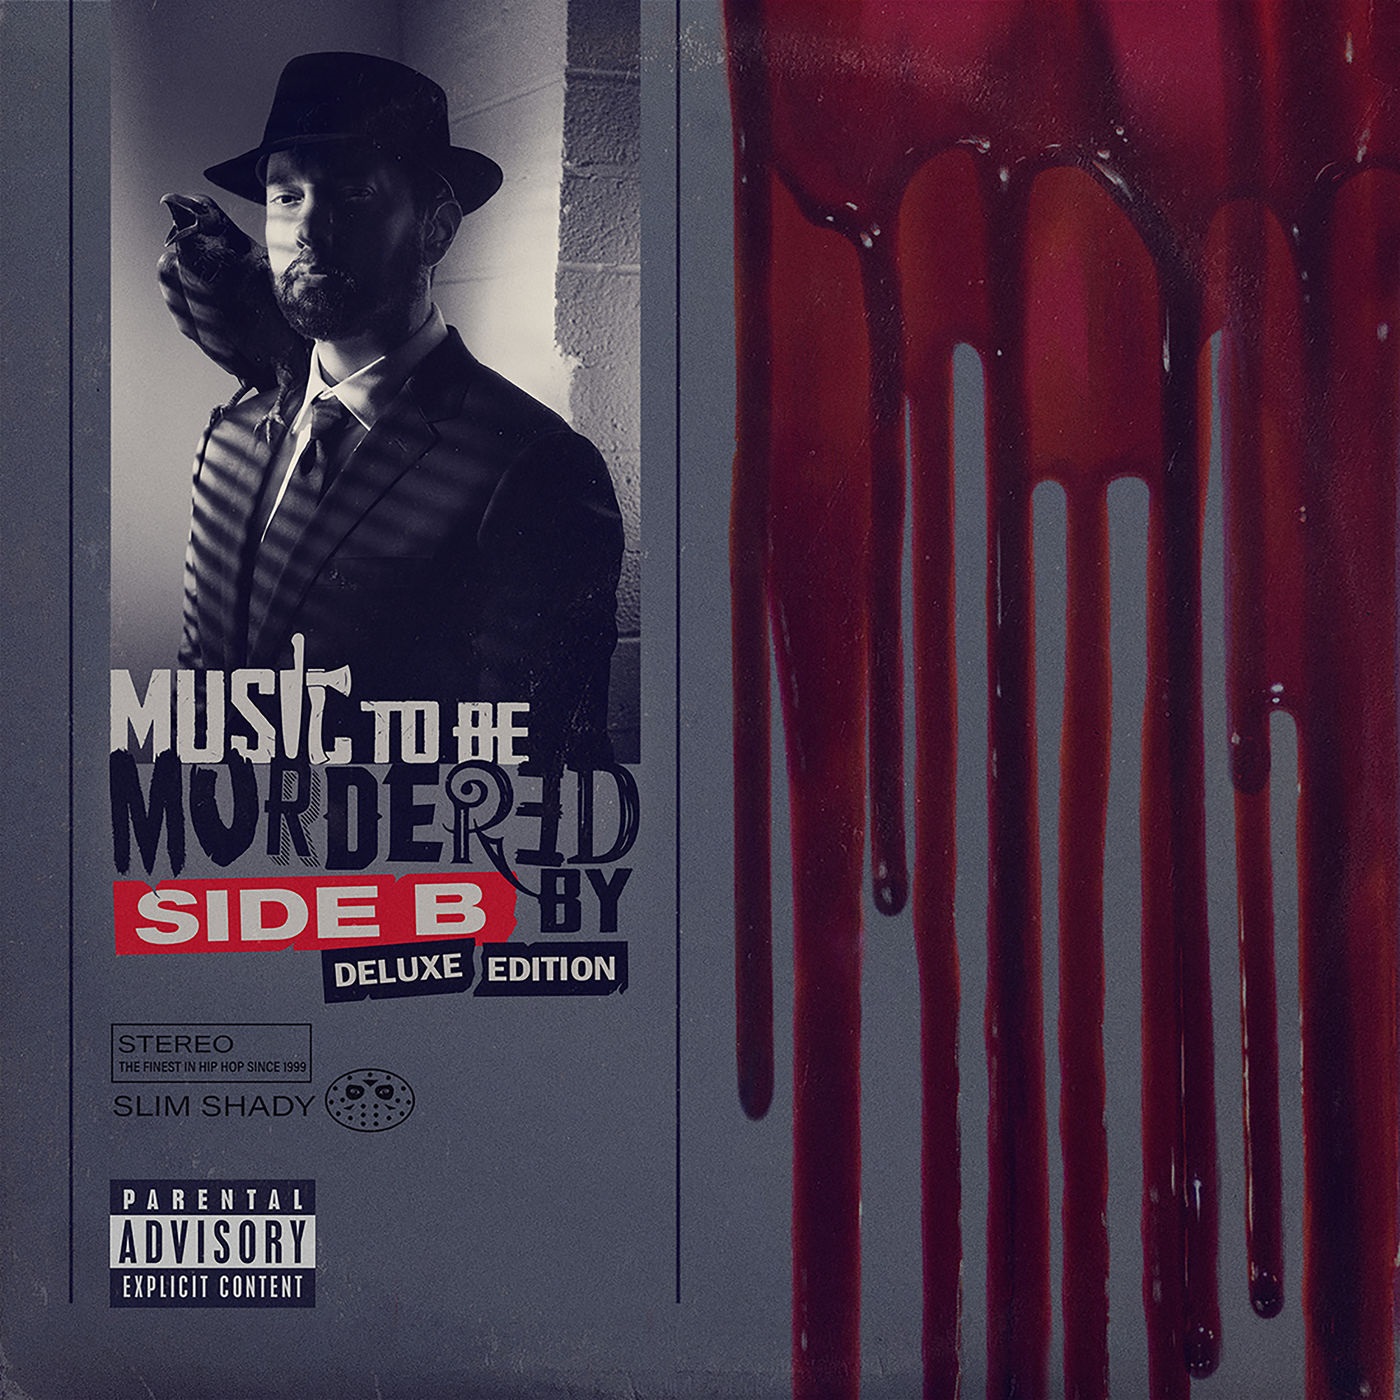 Eminem – Music To Be Murdered By – Side B (Deluxe Edition) (2020) [FLAC 24bit/44,1kHz]